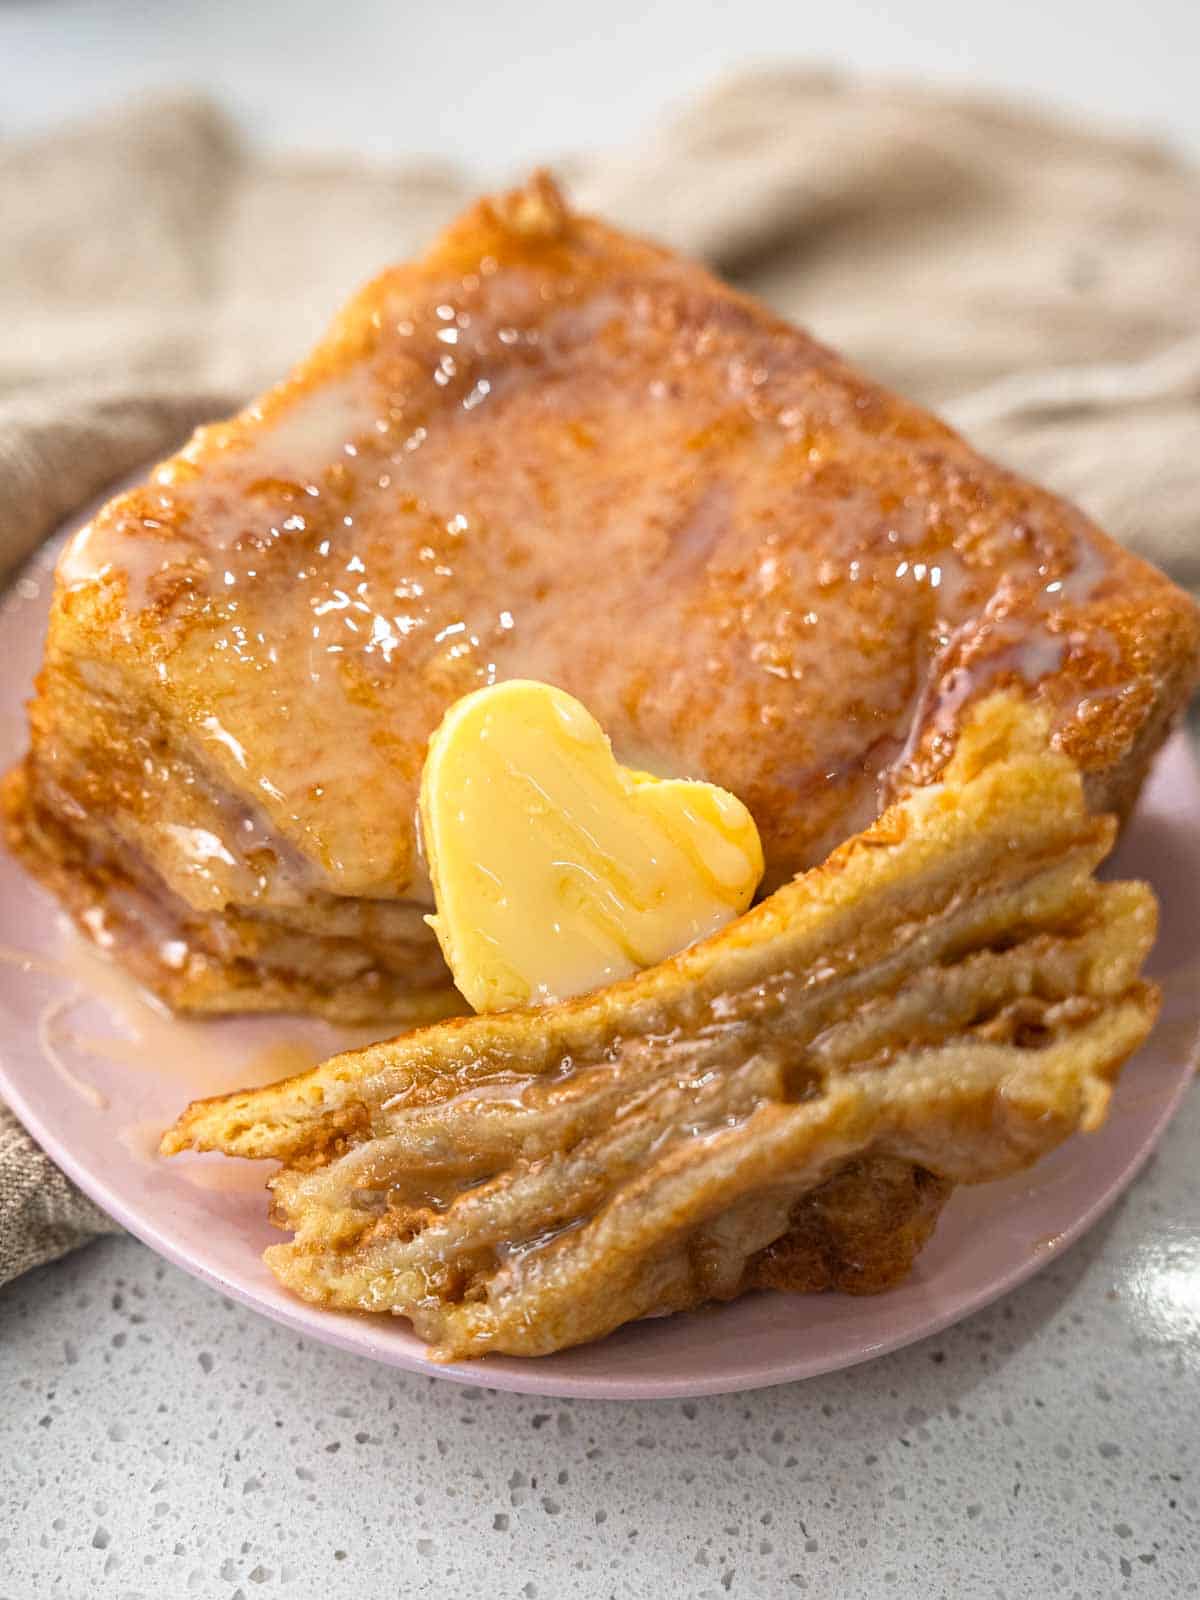 Hong kong french toast served with condensed milk and butter